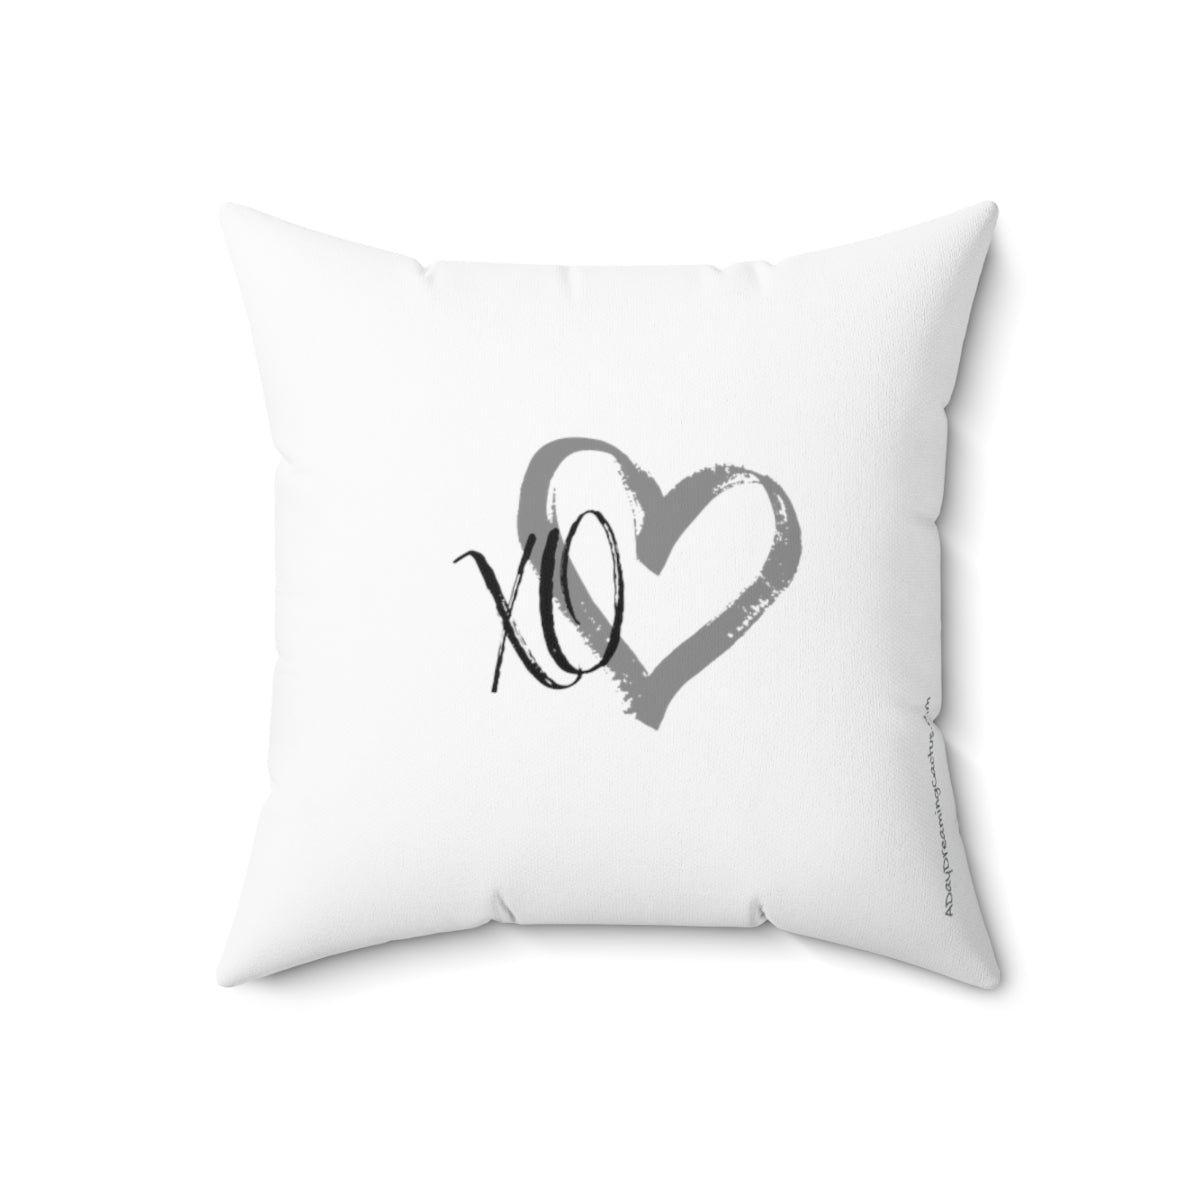 White Square Pillow Case - Home Is Where My Dog Is - Home Decor Pillow Cover - Accent Pillow Cover